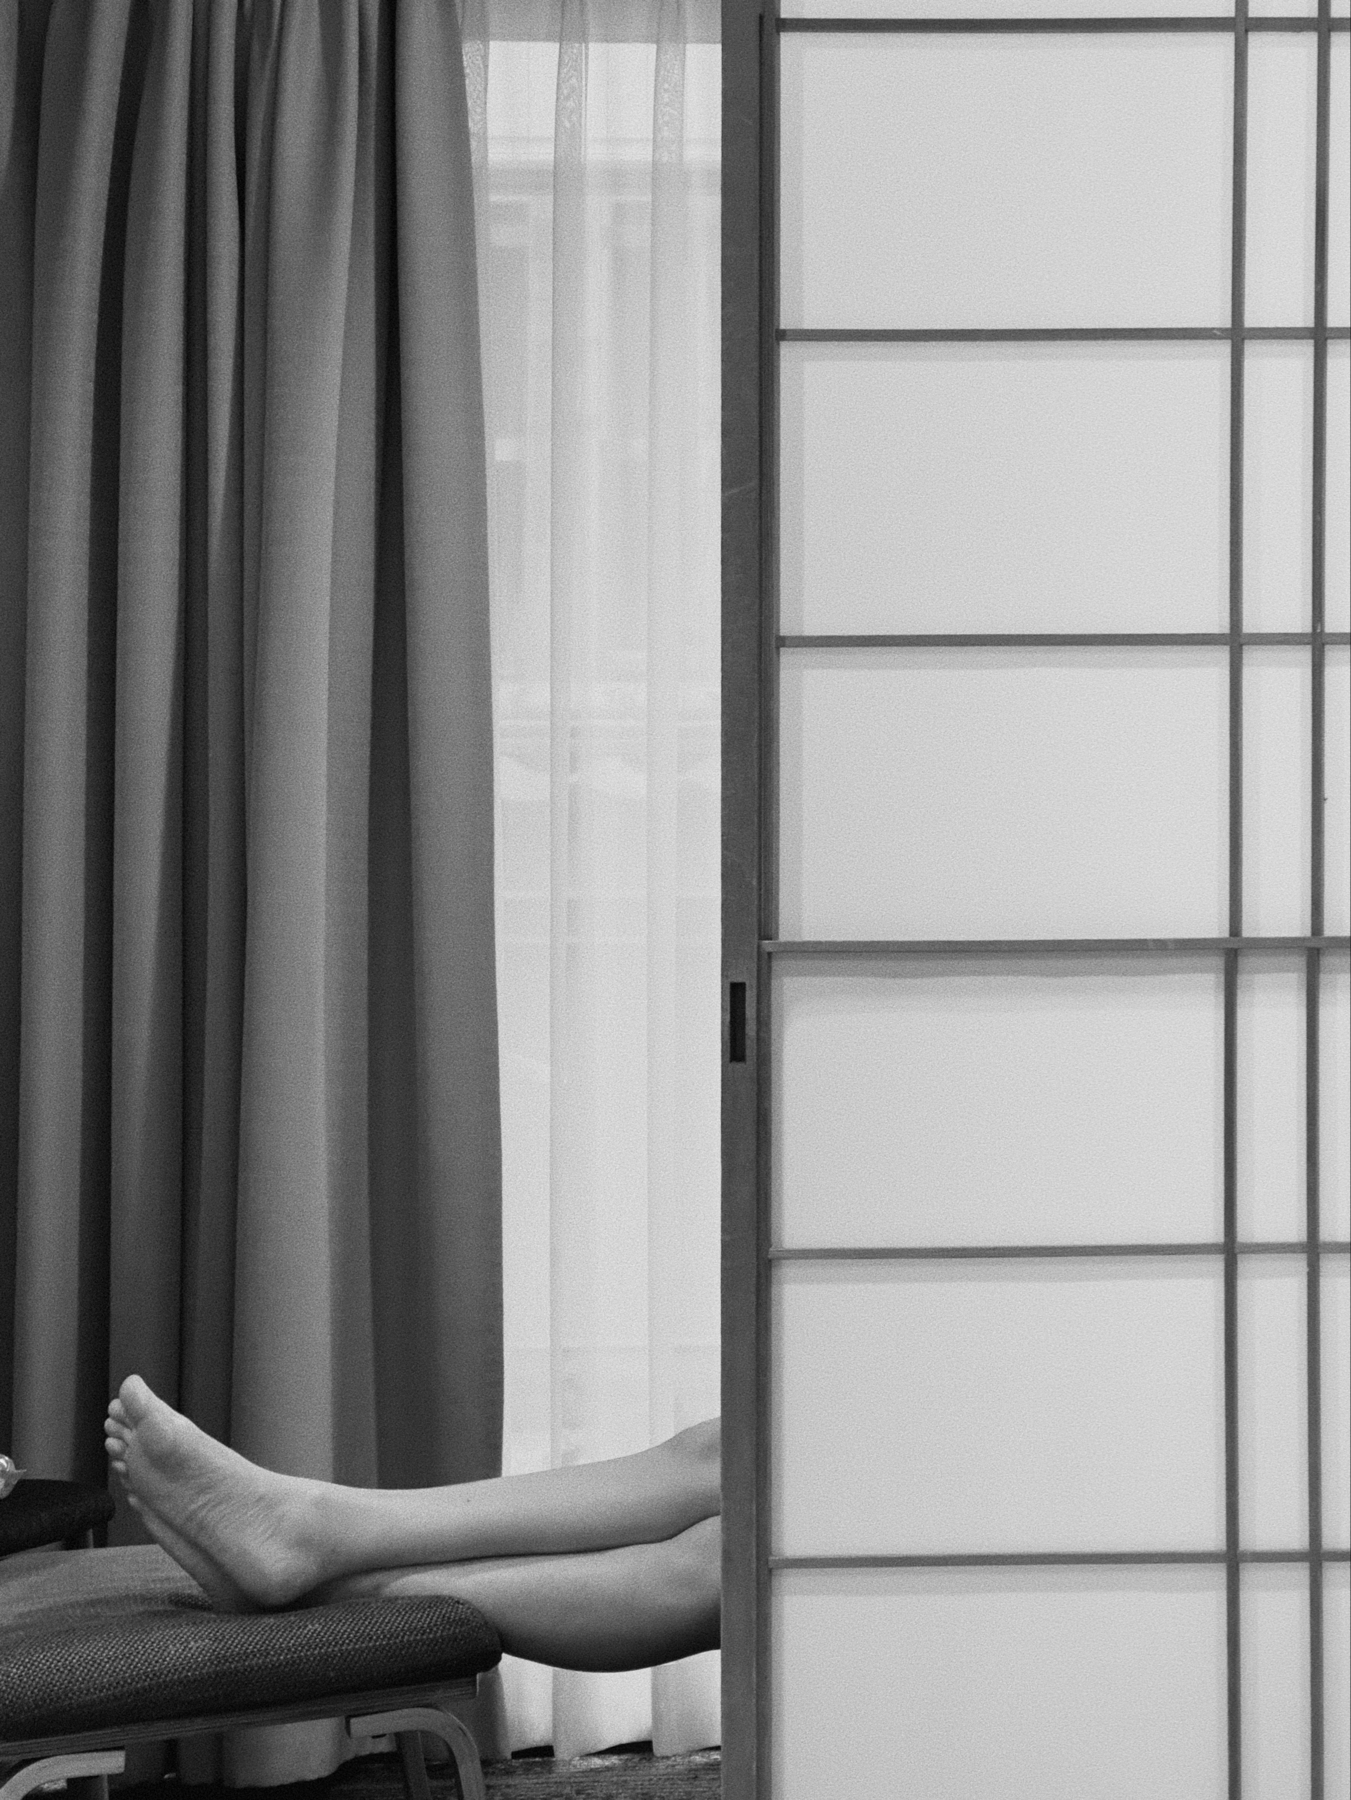 Black and white photo showing the lower legs and feet of a person reclined and resting on a chair, partially obscured by a curtain, next to a door with frosted glass panels.